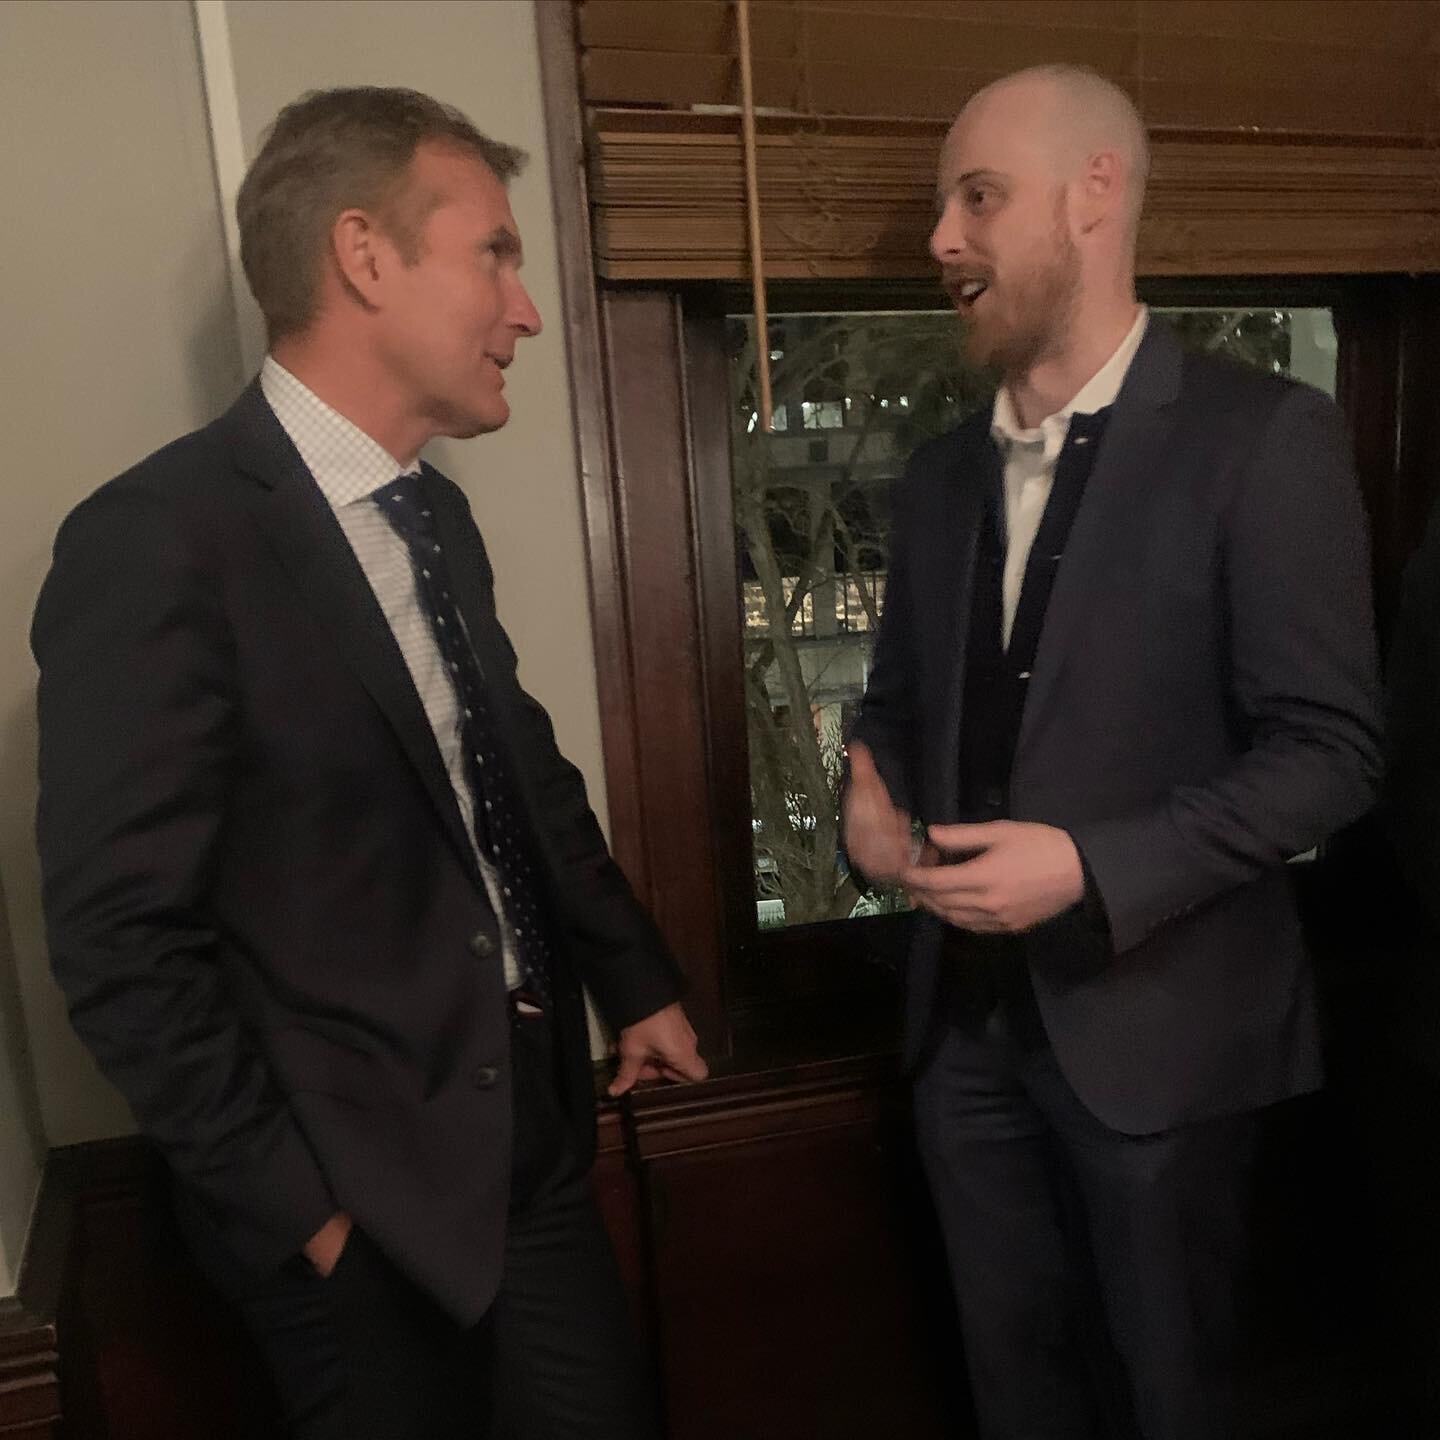 ✅ NSW ADVOCACY ✅

🛴 We recently caught up with Active Transport Minister Rob Stokes to discuss our advocacy for personal mobility devices in NSW.

🛹 We reiterated our support for privately owned devices in NSW as a complementary approach toward the